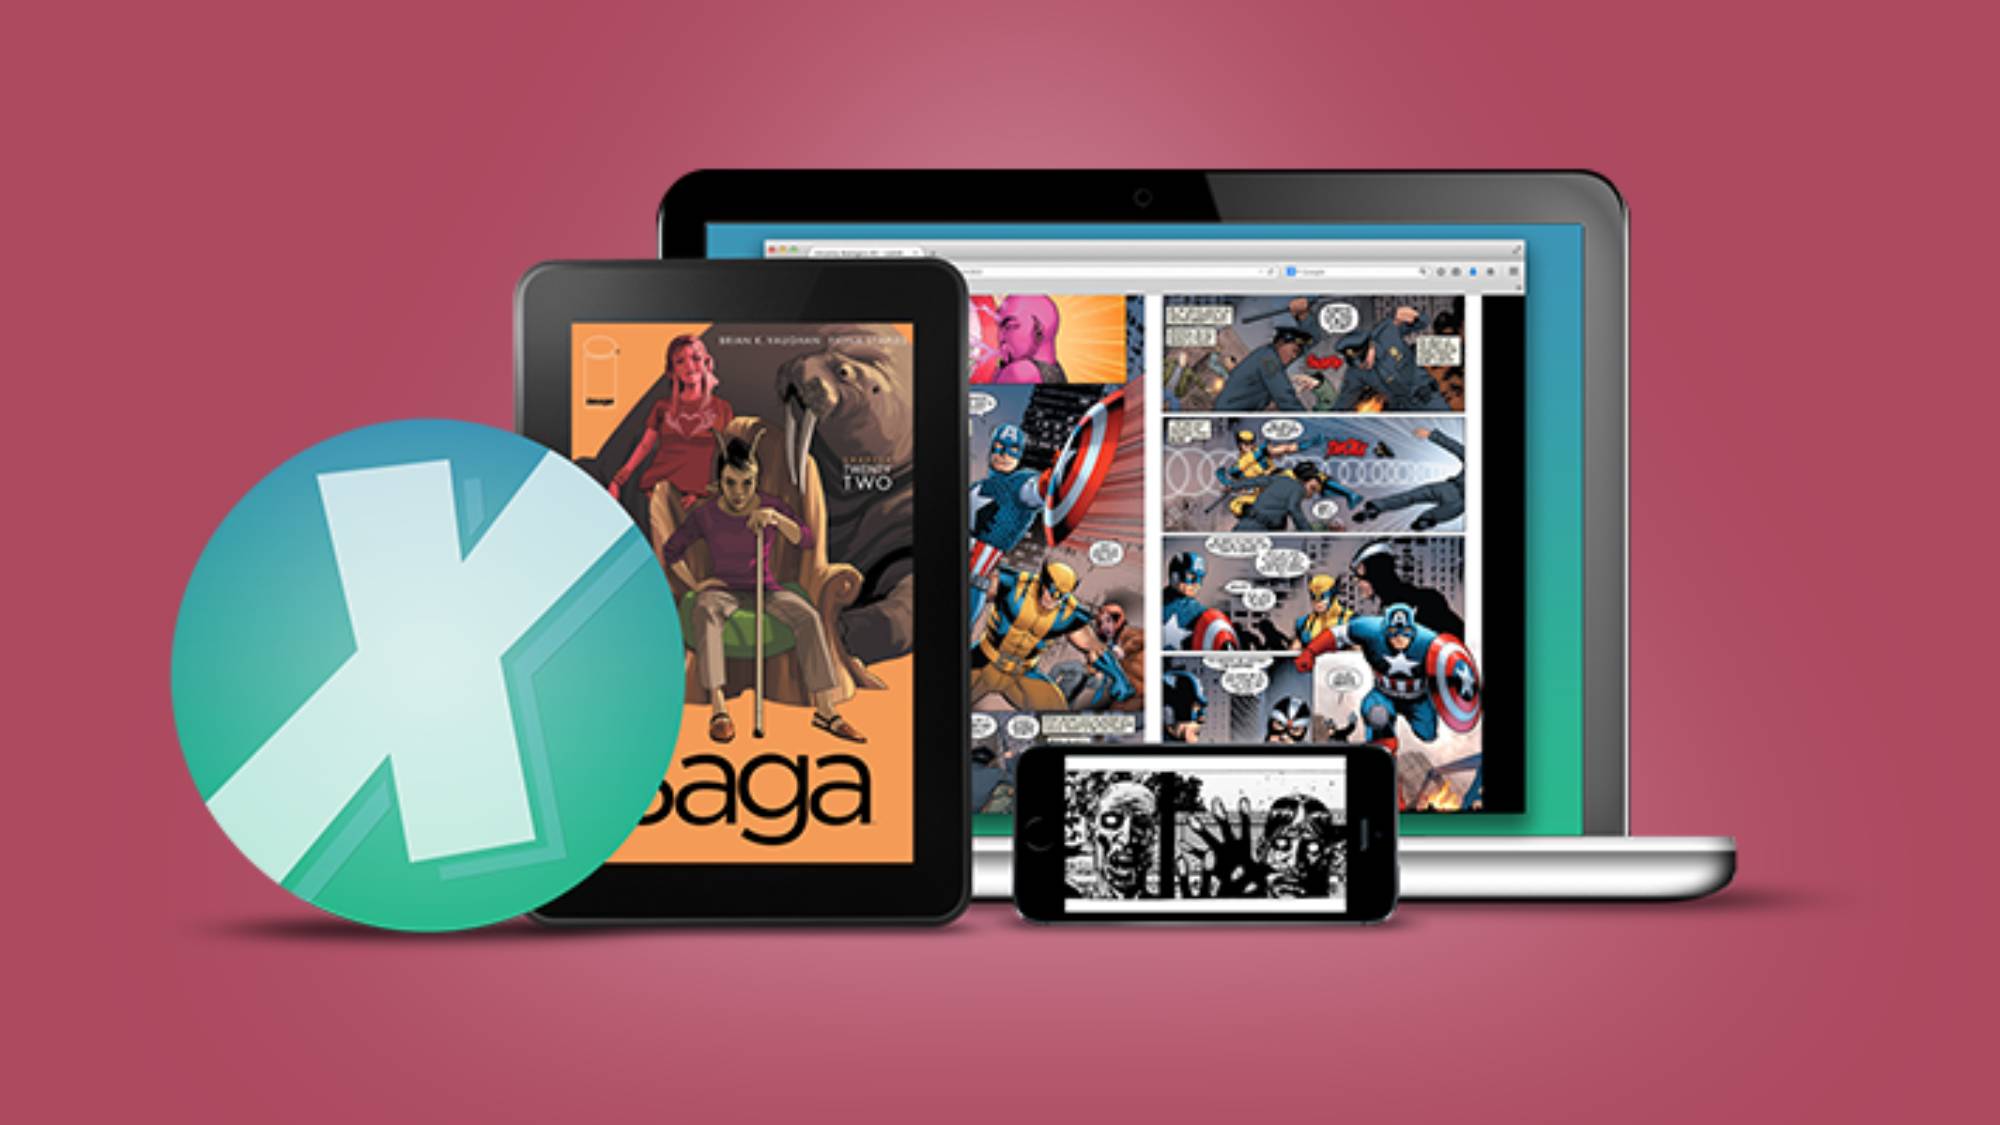 The ComiXology app lets you read comics on tablets, PCs and smartphones